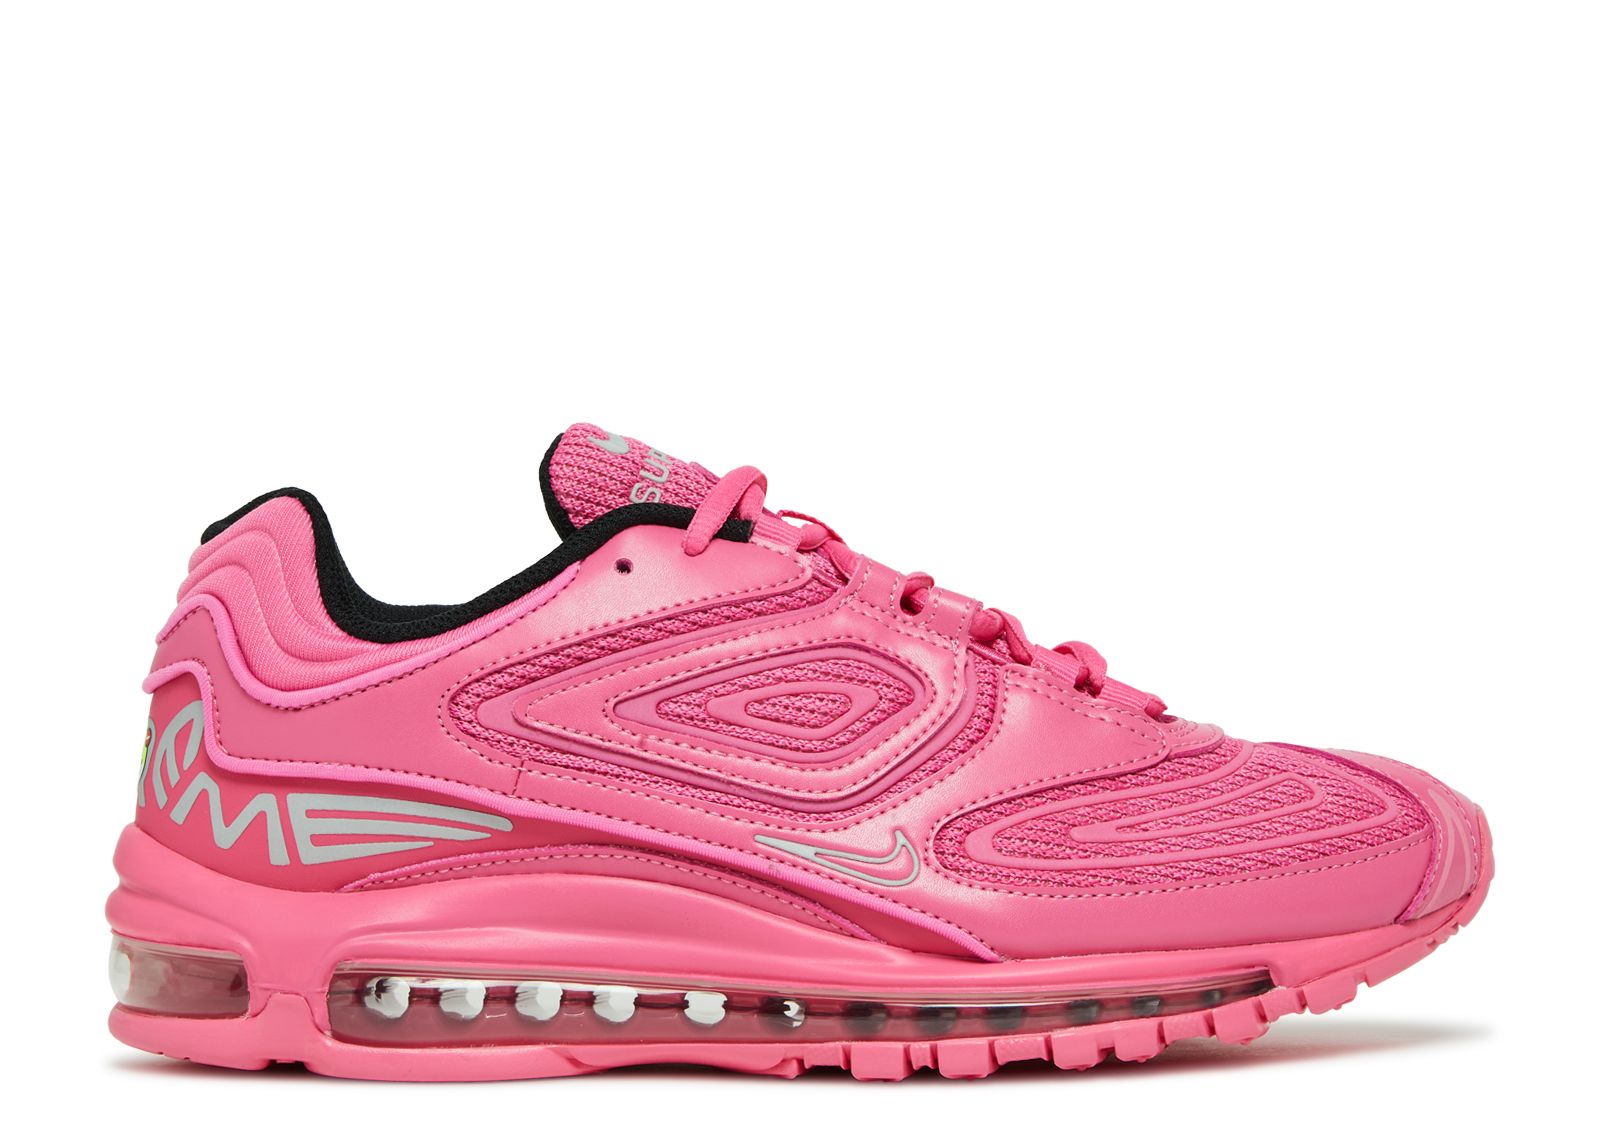 picture admiration communication Supreme X Air Max 98 TL SP 'Pinksicle' - Nike - DR1033 600 -  pinksicle/metallic silver | Flight Club